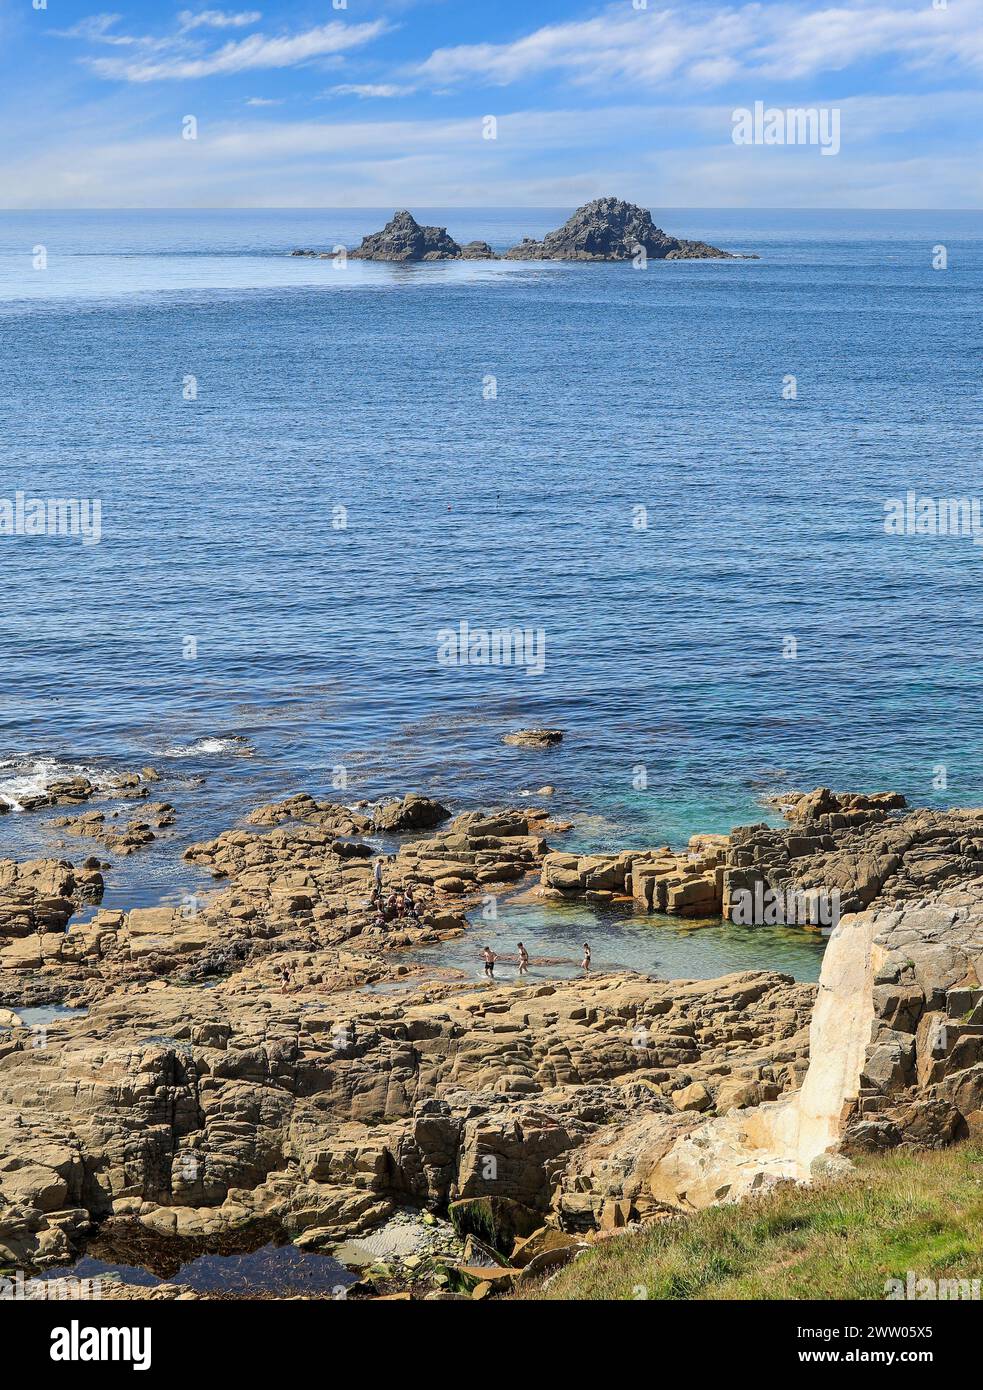 People swimming and sunbathing on the rocks, with The Brisons rocks near Cape Cornwall, St Just, Cornwall, West Country, England, UK Stock Photo